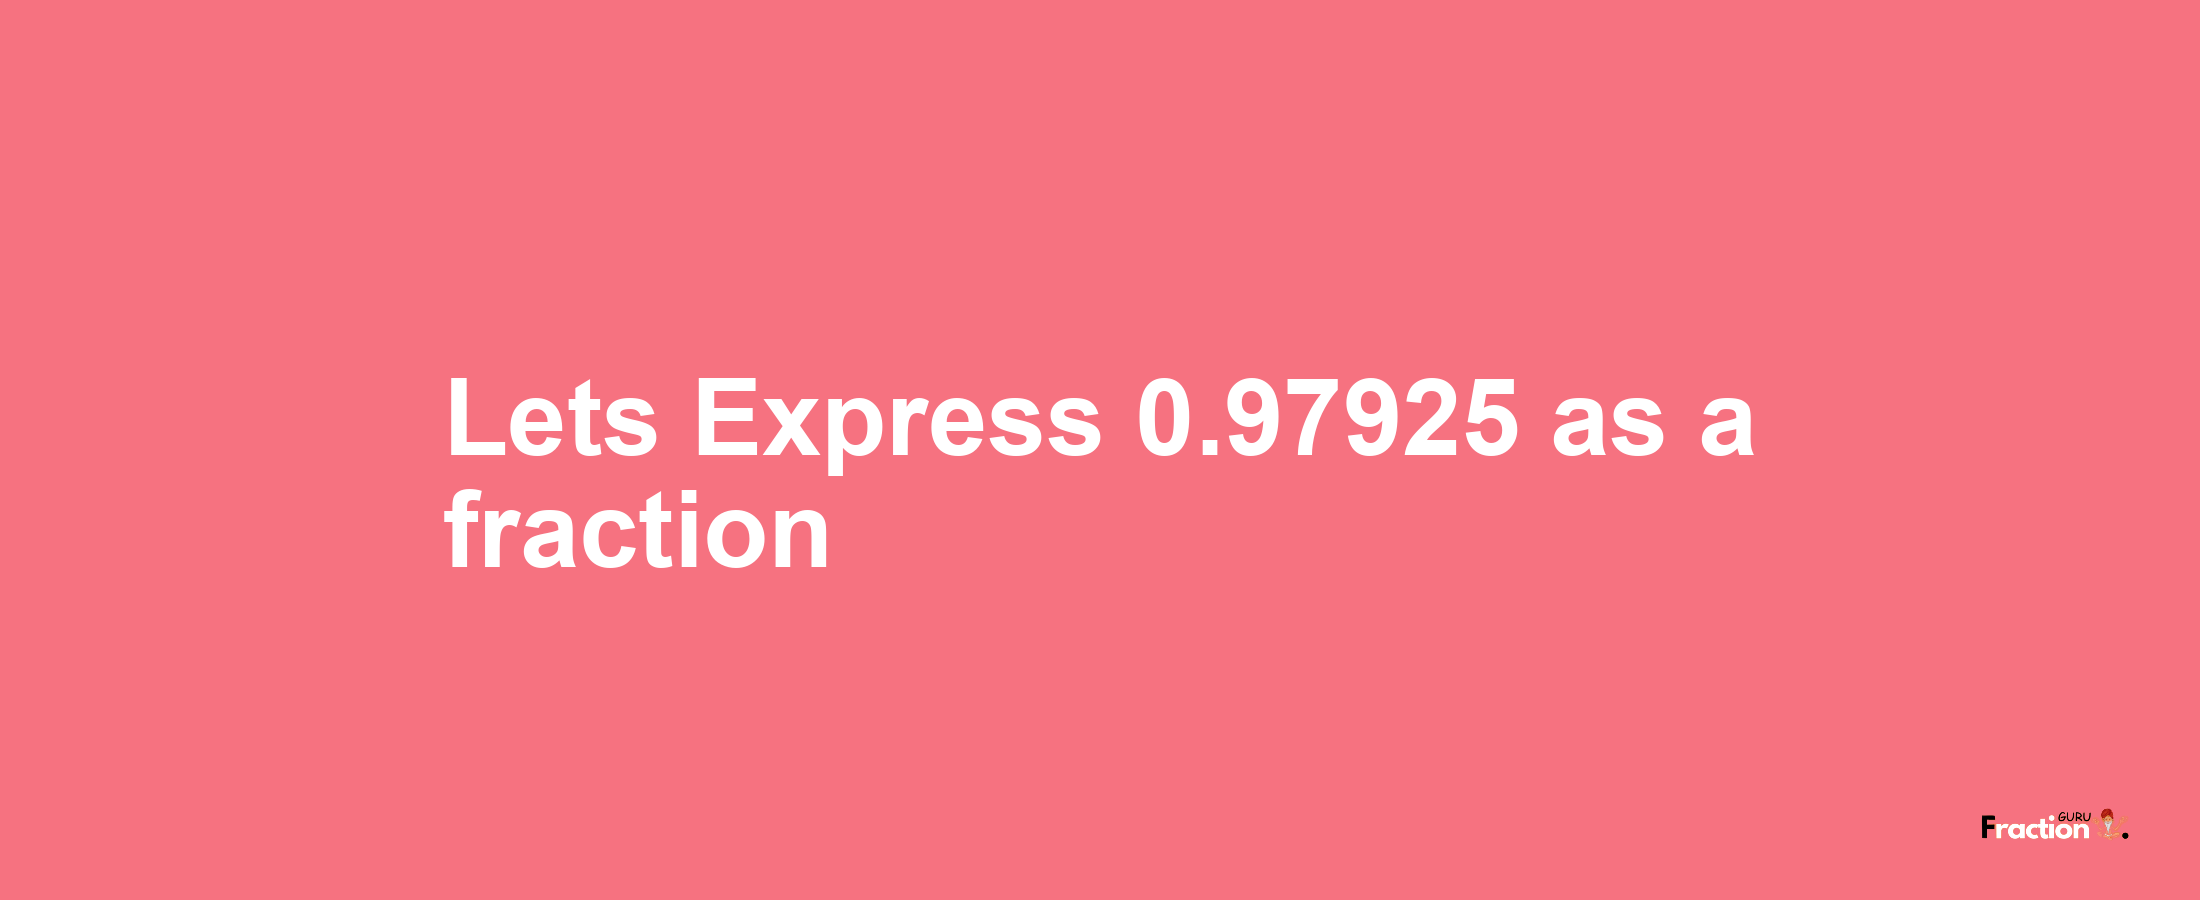 Lets Express 0.97925 as afraction